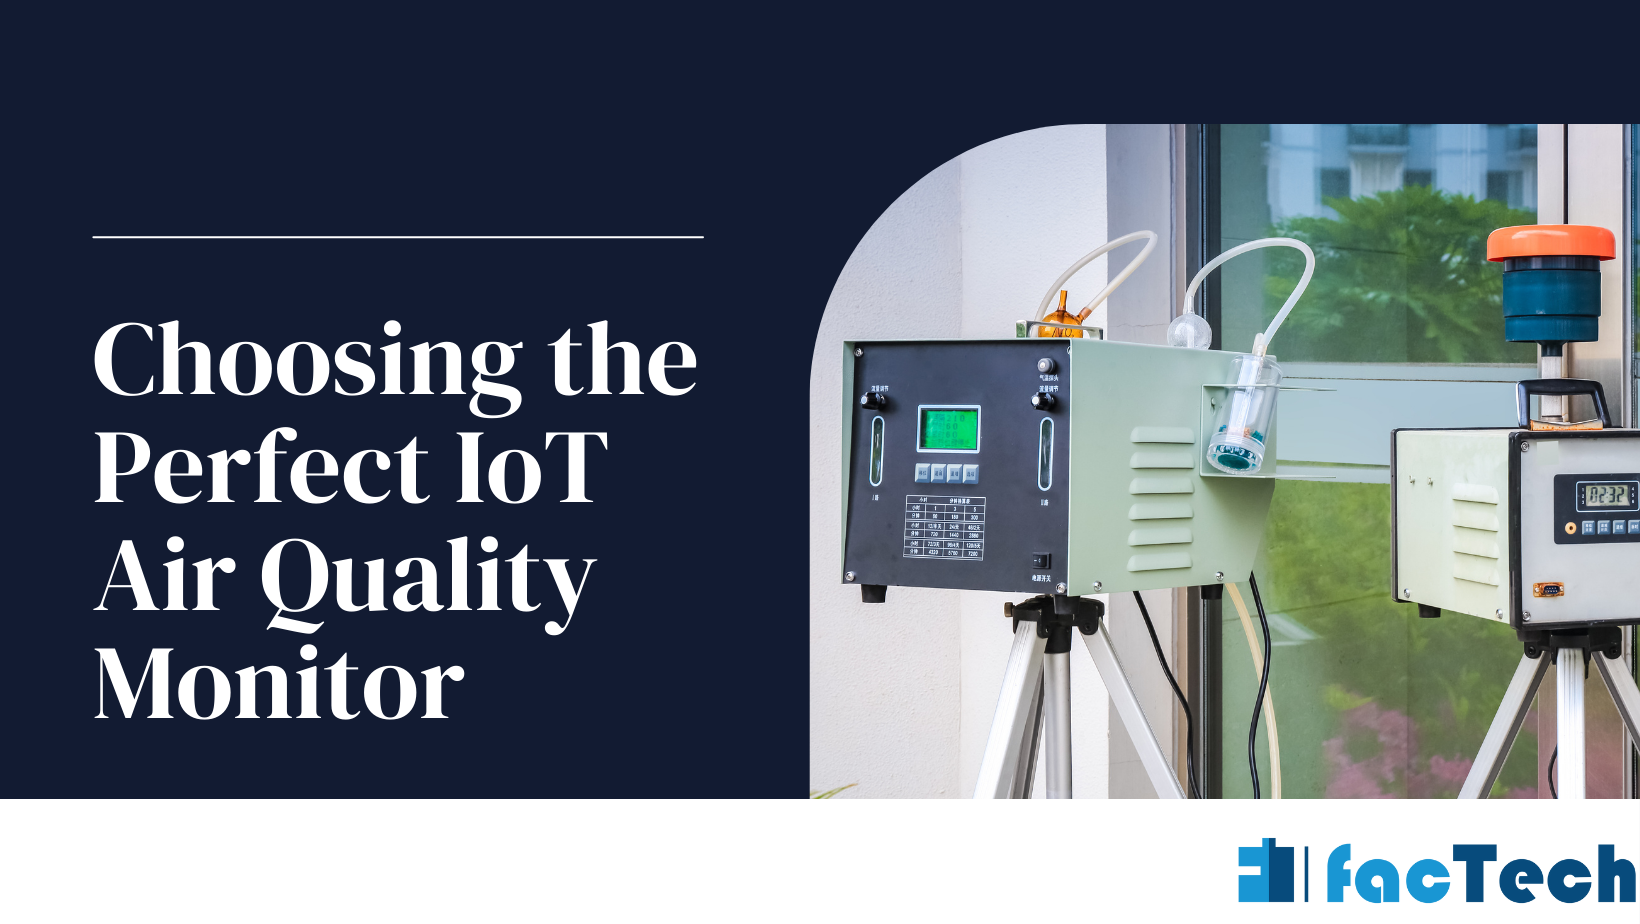 Choosing the Perfect IoT Air Quality Monitor